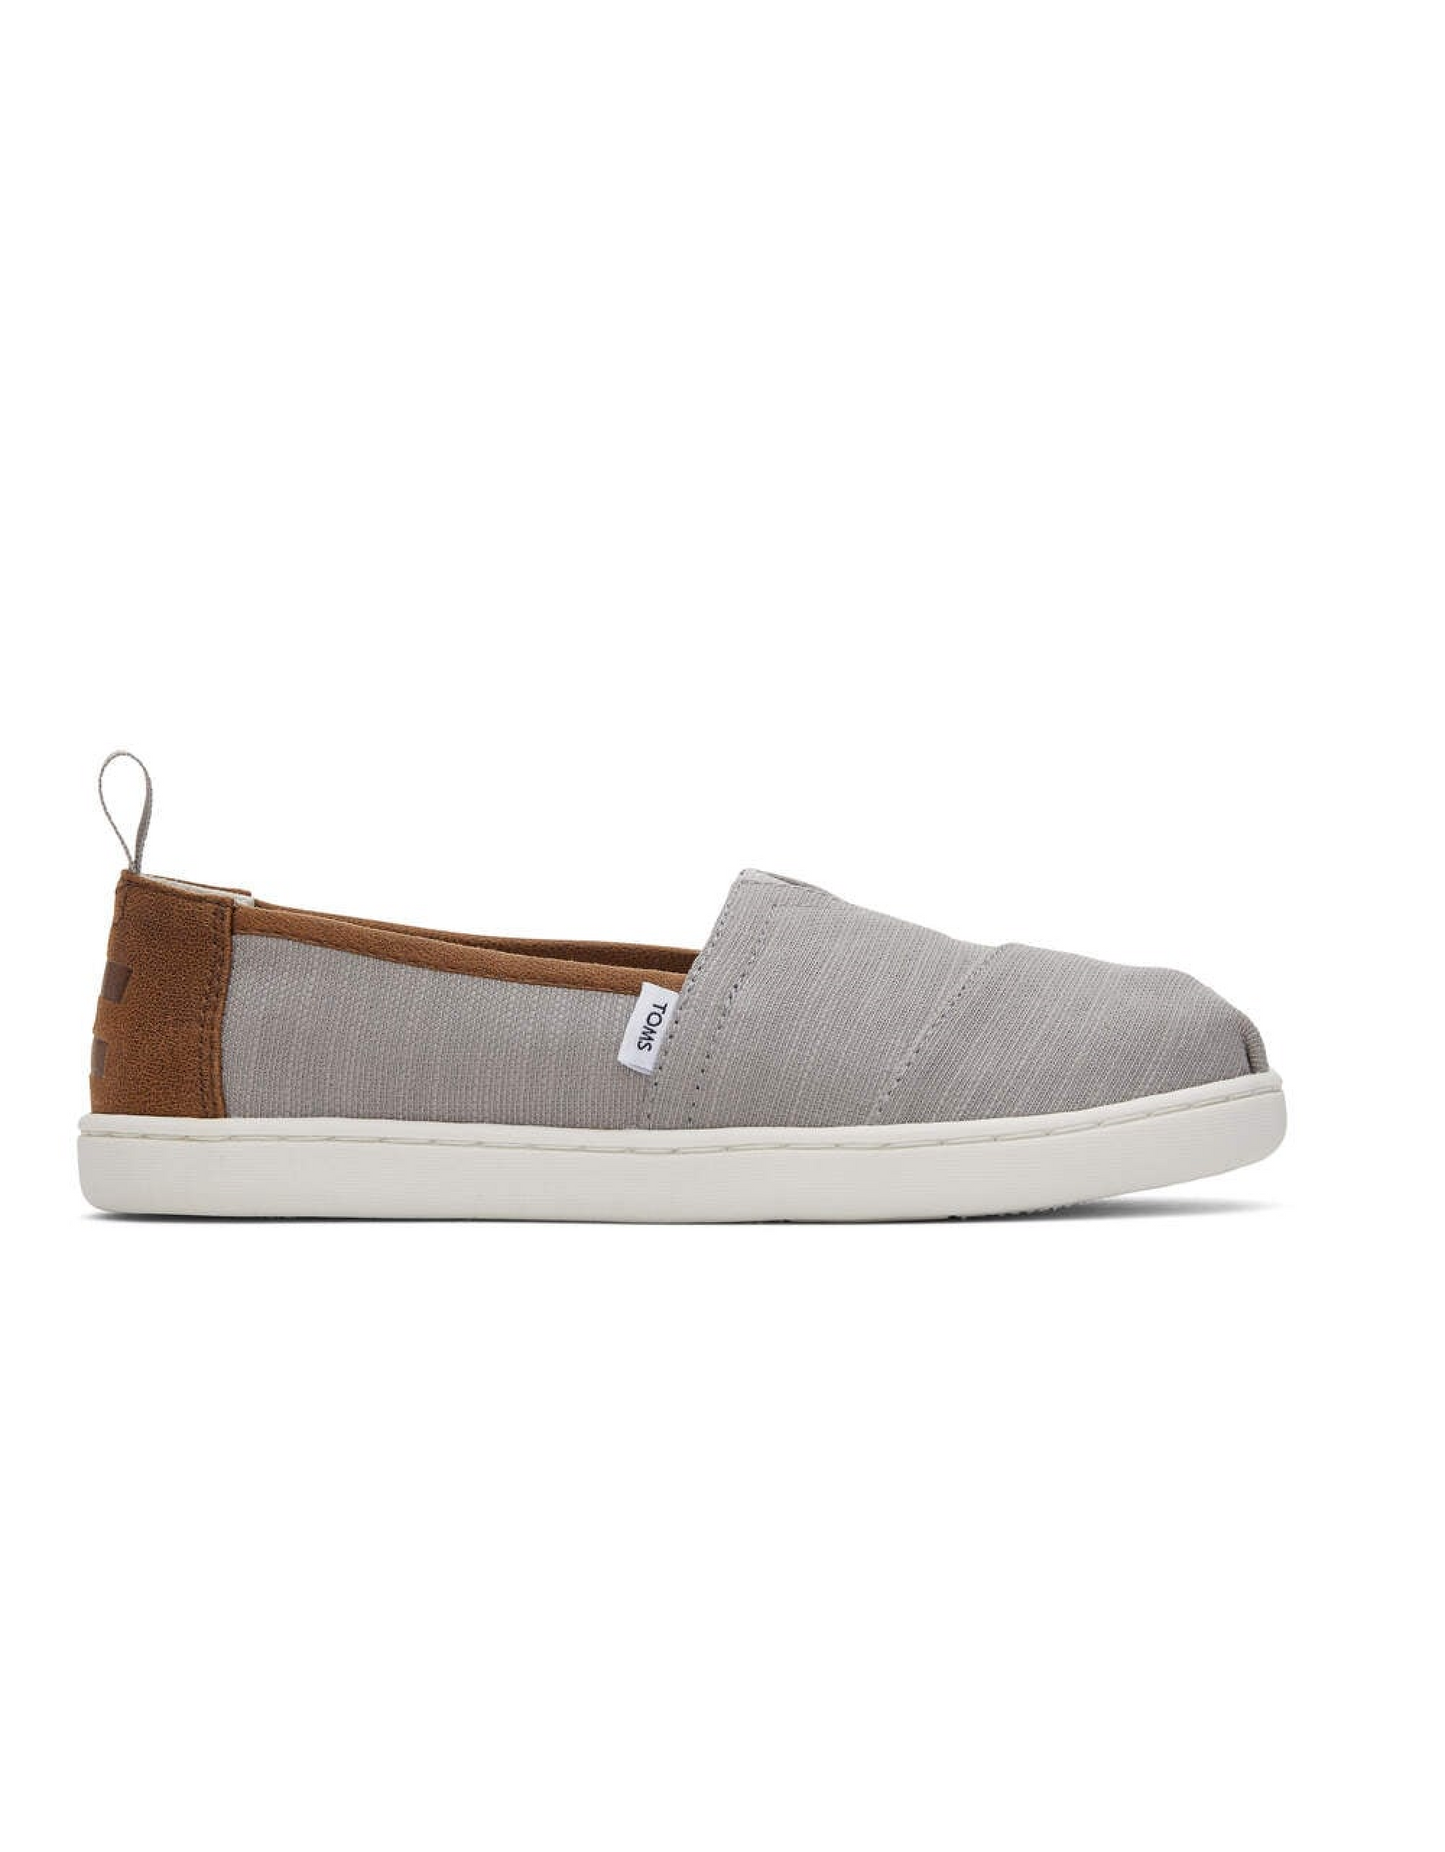 Toms Youth Alpargata Recycled Cotton Canvas Drizzle Grey/Dark Brown Trim